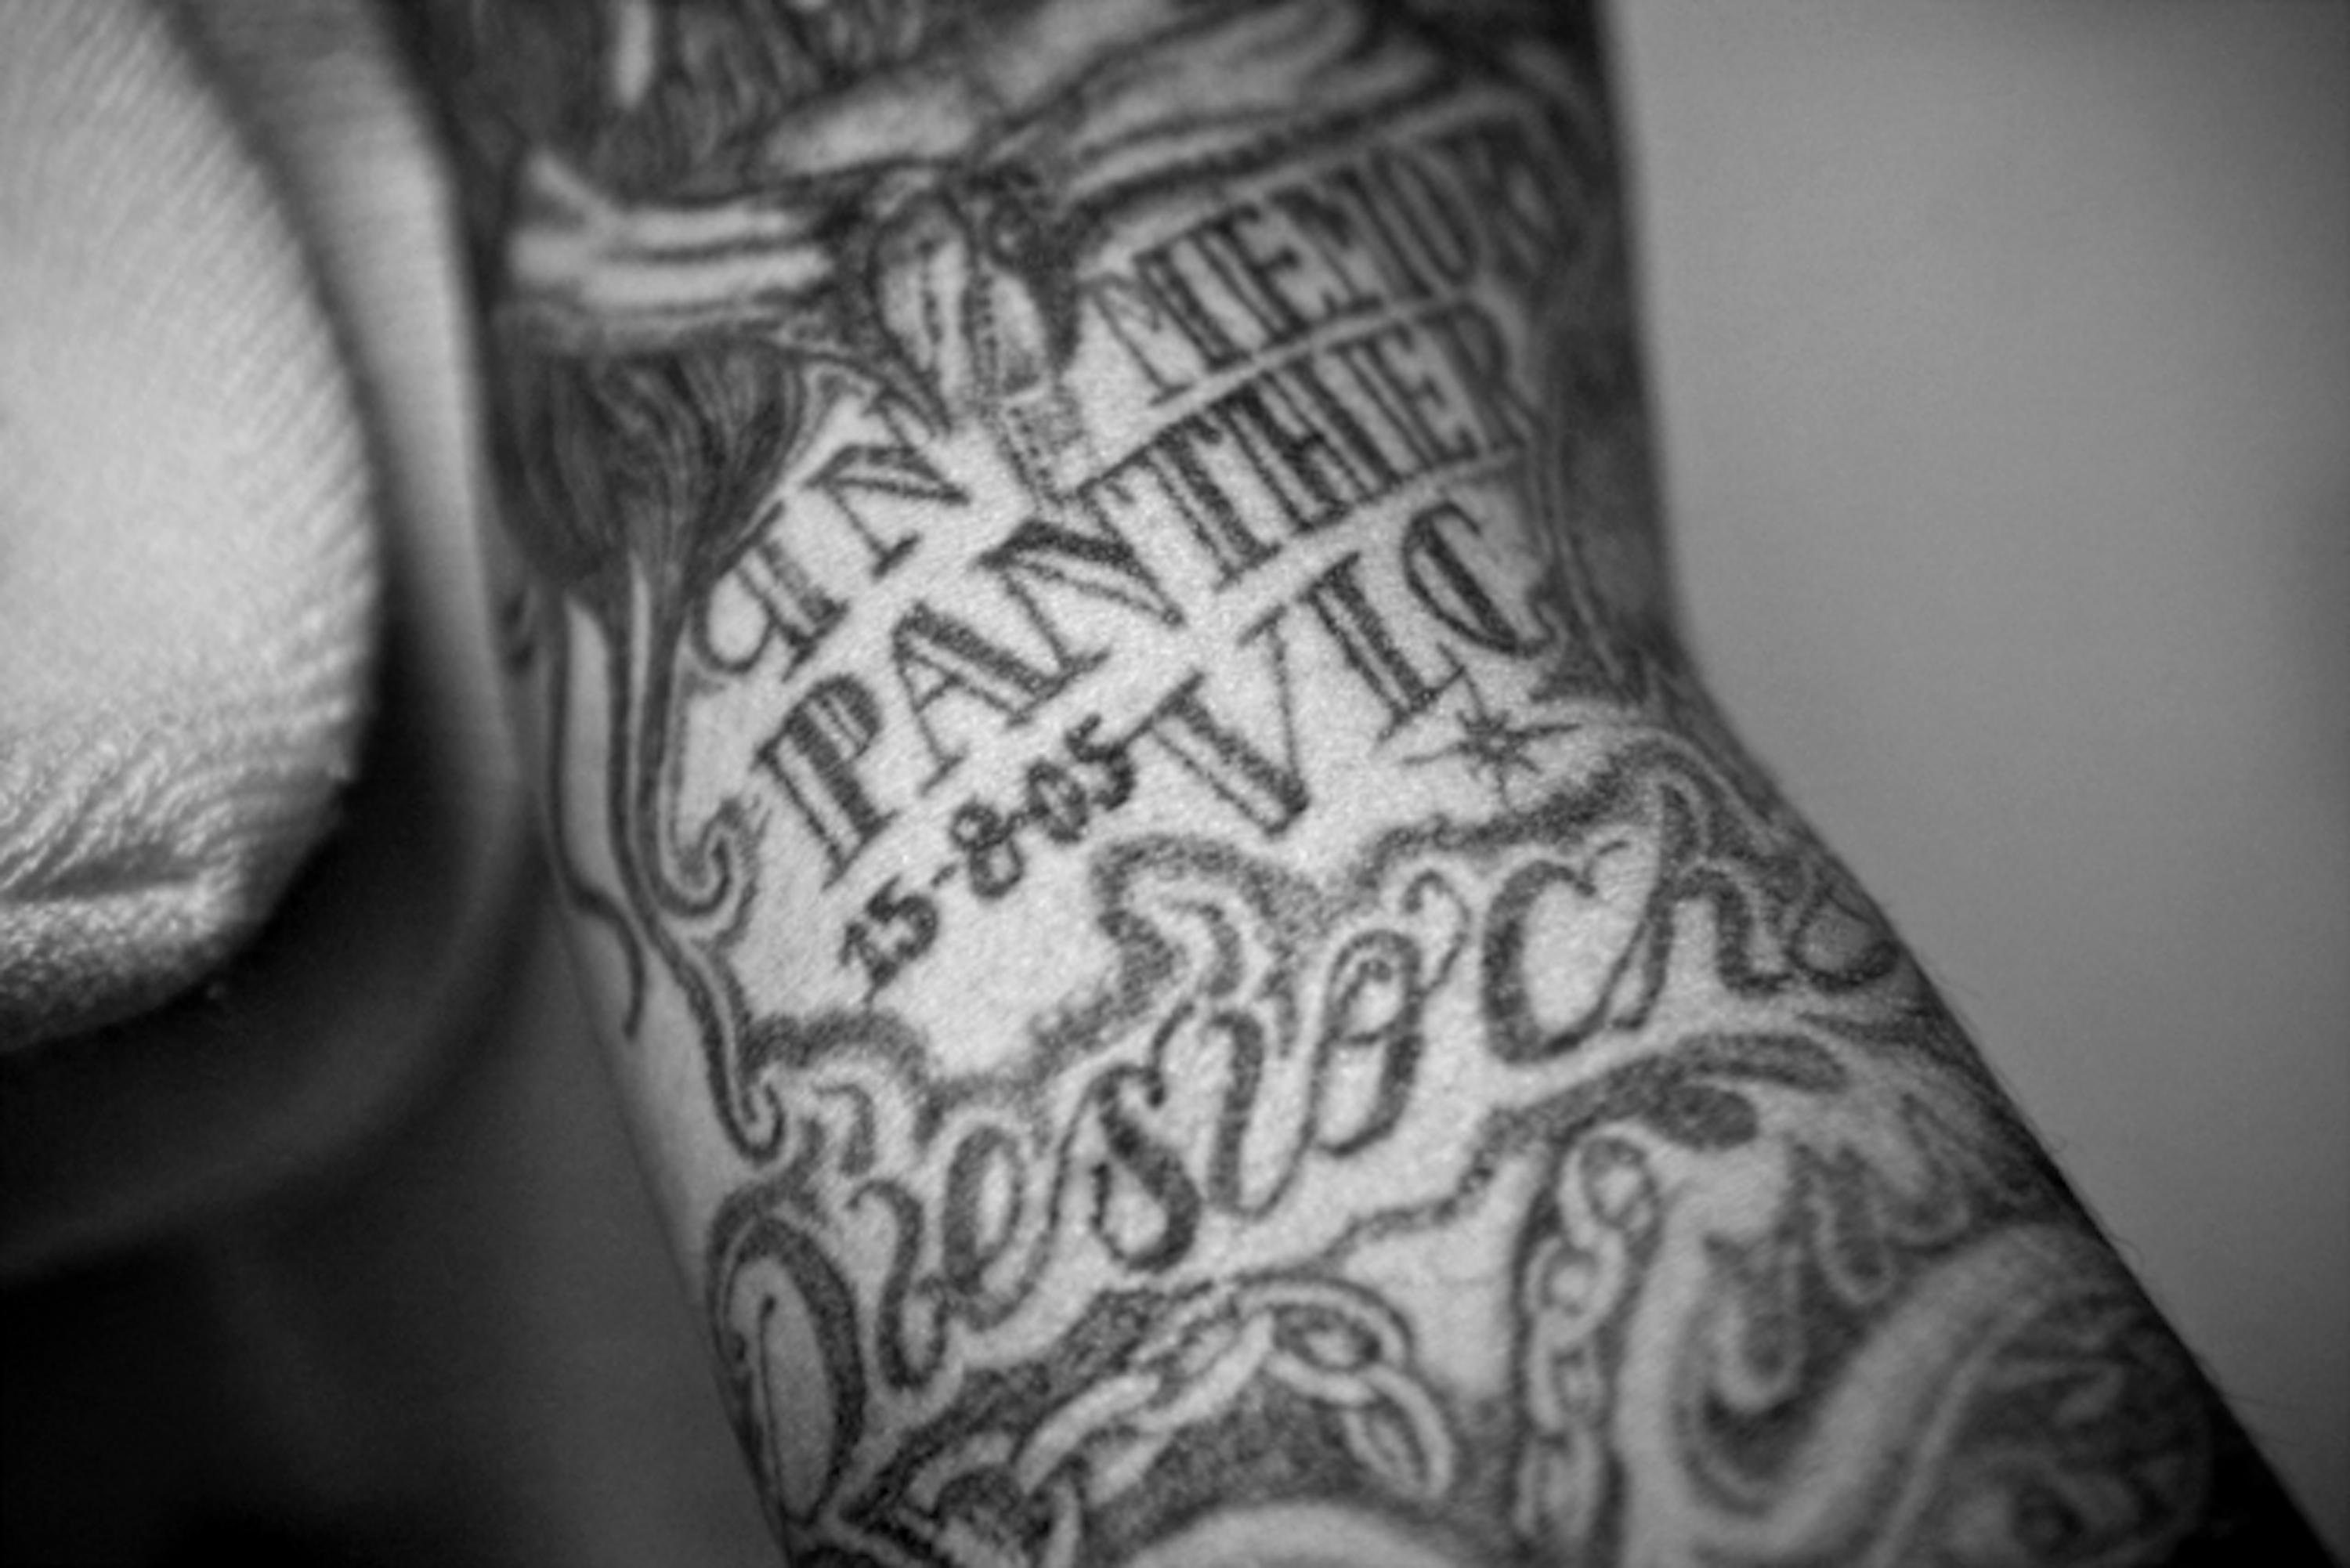 August 15, 2005, the date El Sur collapsed, tattooed on the arm of Óscar Humberto Contreras, alias Abuelo, one of the founders of the 18th Street gang in Guatemala. Photo Pau Coll